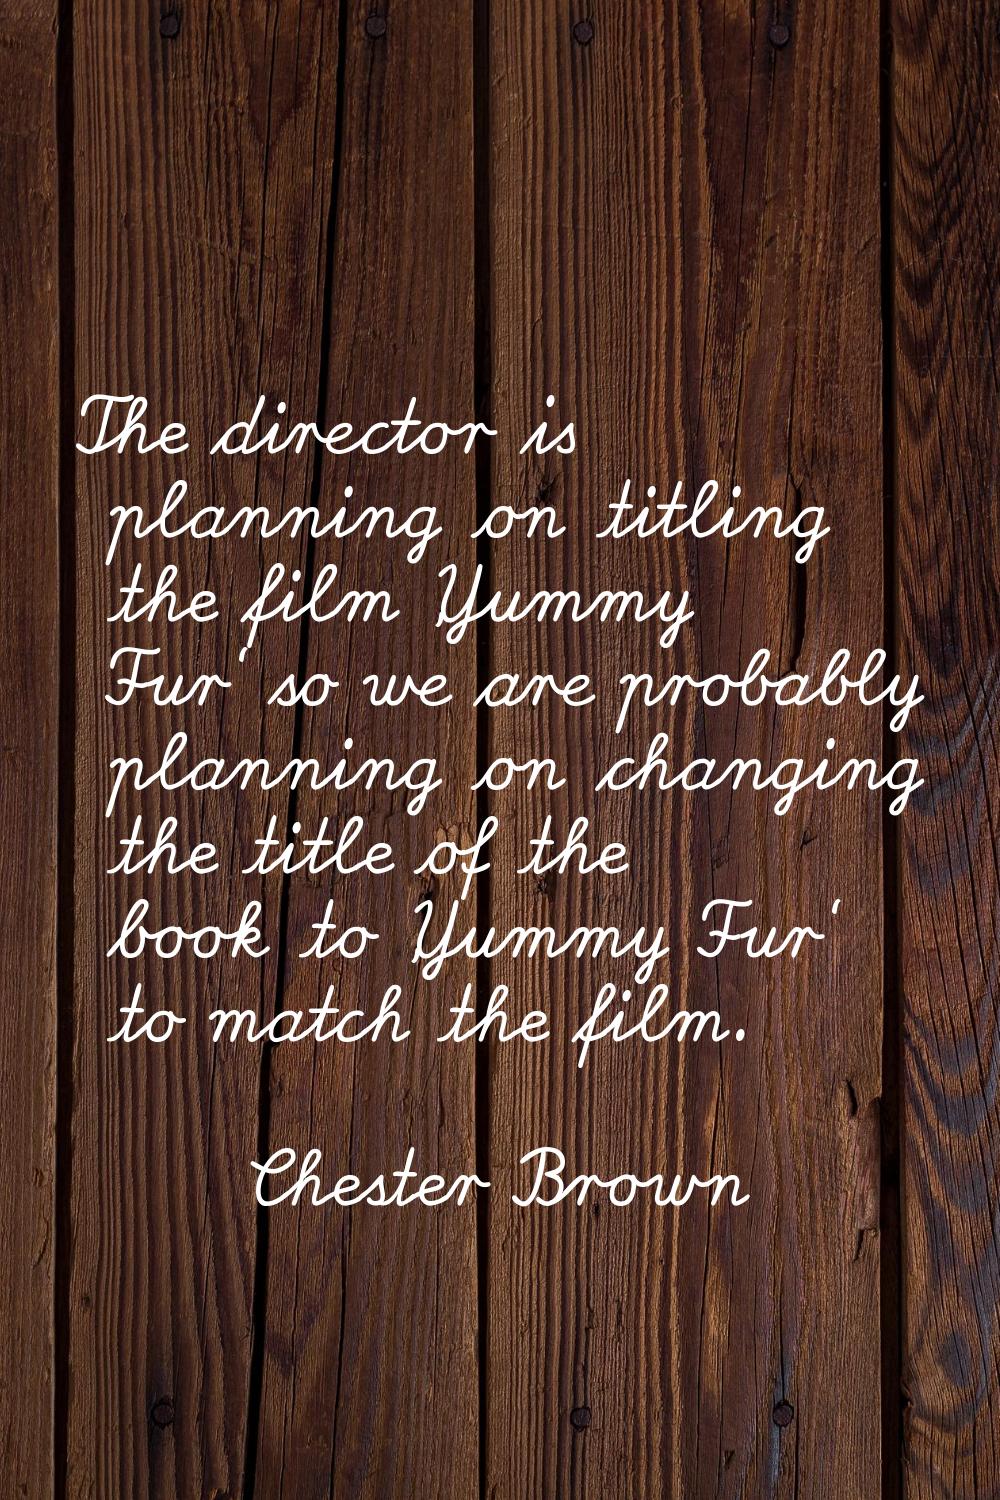 The director is planning on titling the film 'Yummy Fur' so we are probably planning on changing th